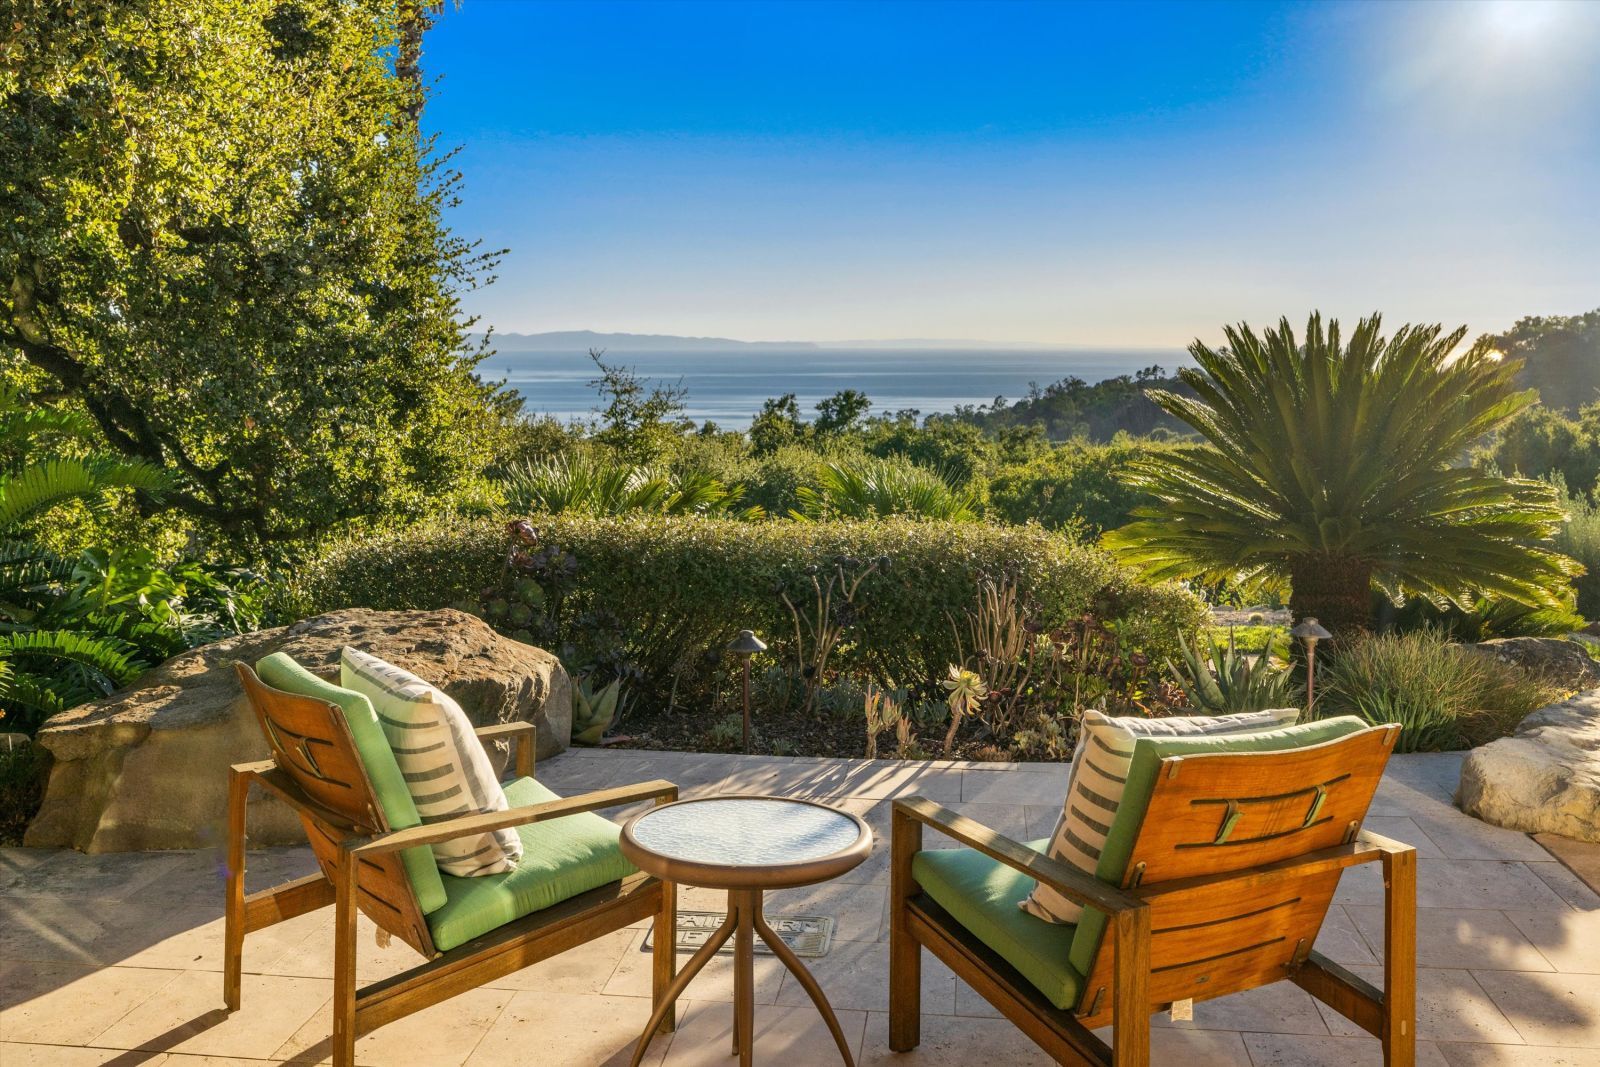 Two deck chairs and small round table on a patio overlooking lush greenery and the sparkling ocean on a sunny day.